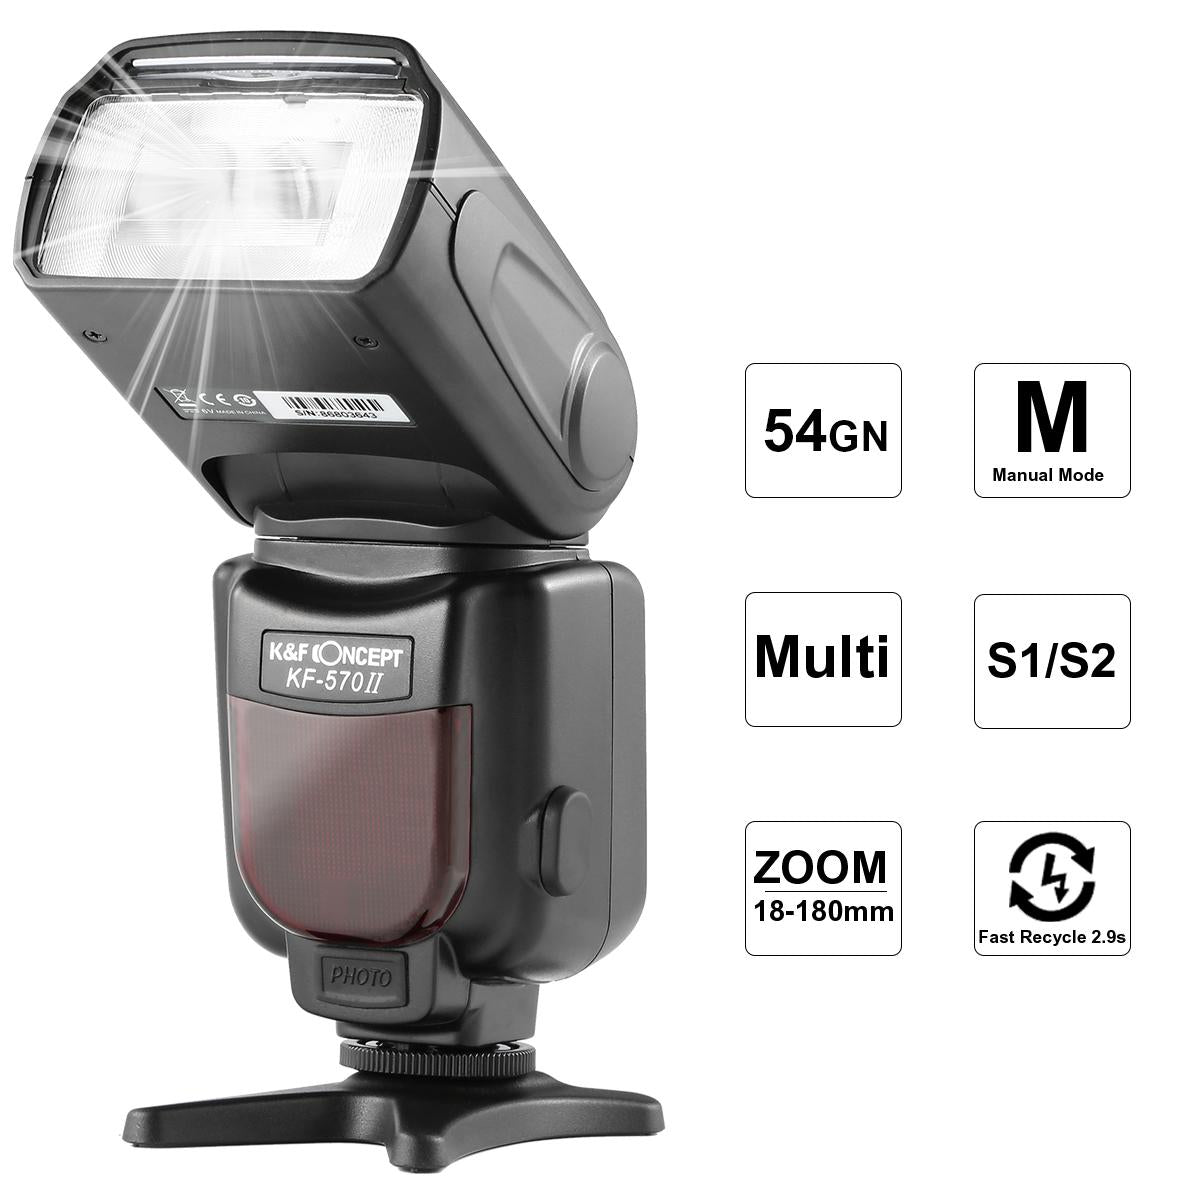 K&F Concept570 II Flash for Canon Nikon with Single-Contact Shoe Mount